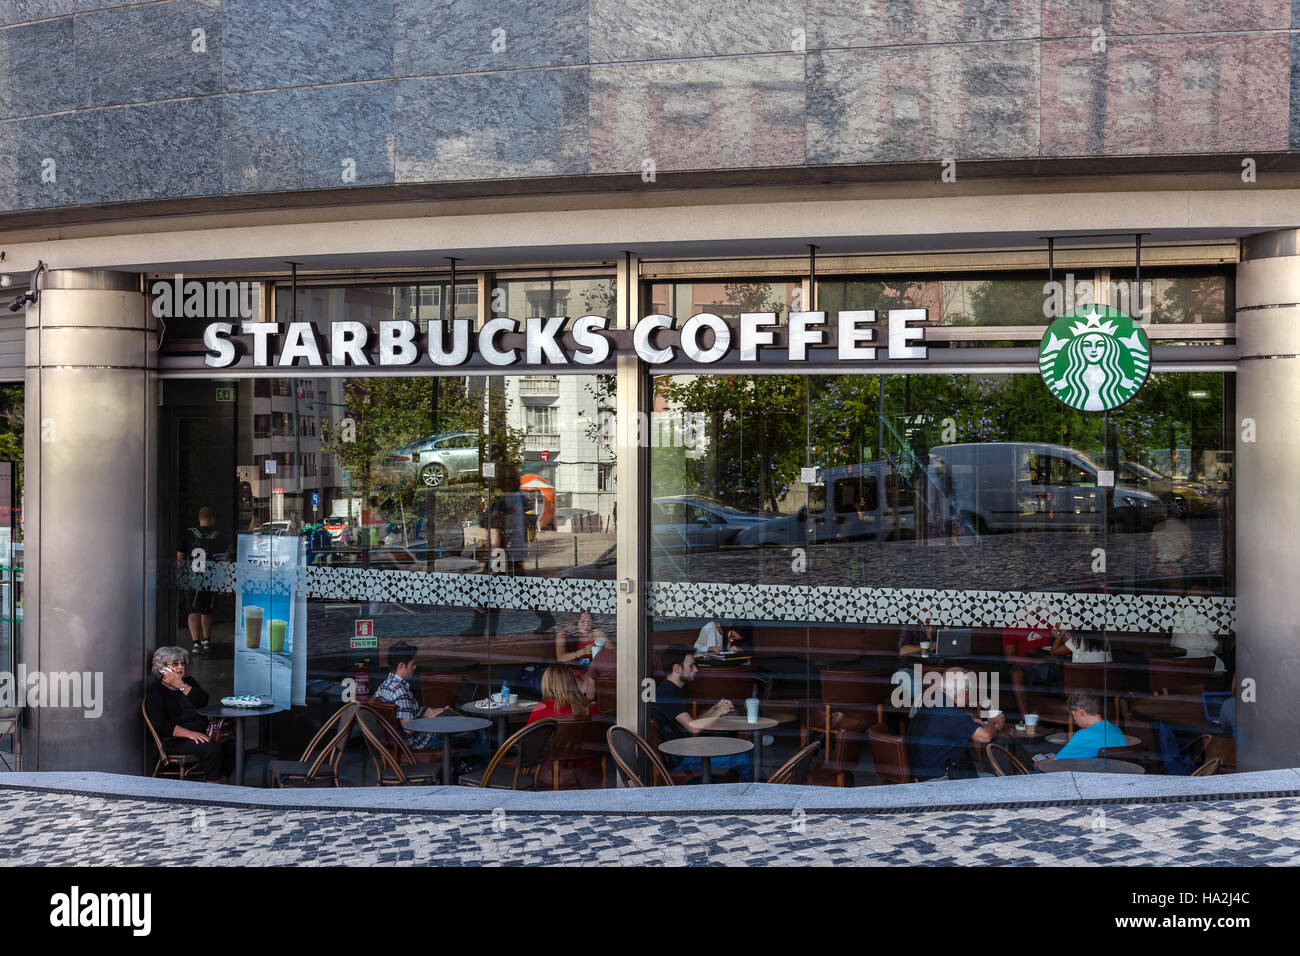 Lisbon, Portugal - October 19, 2016: Starbucks coffee house on the El Corte Ingles Shopping Mall, a high end global retail company. Stock Photo